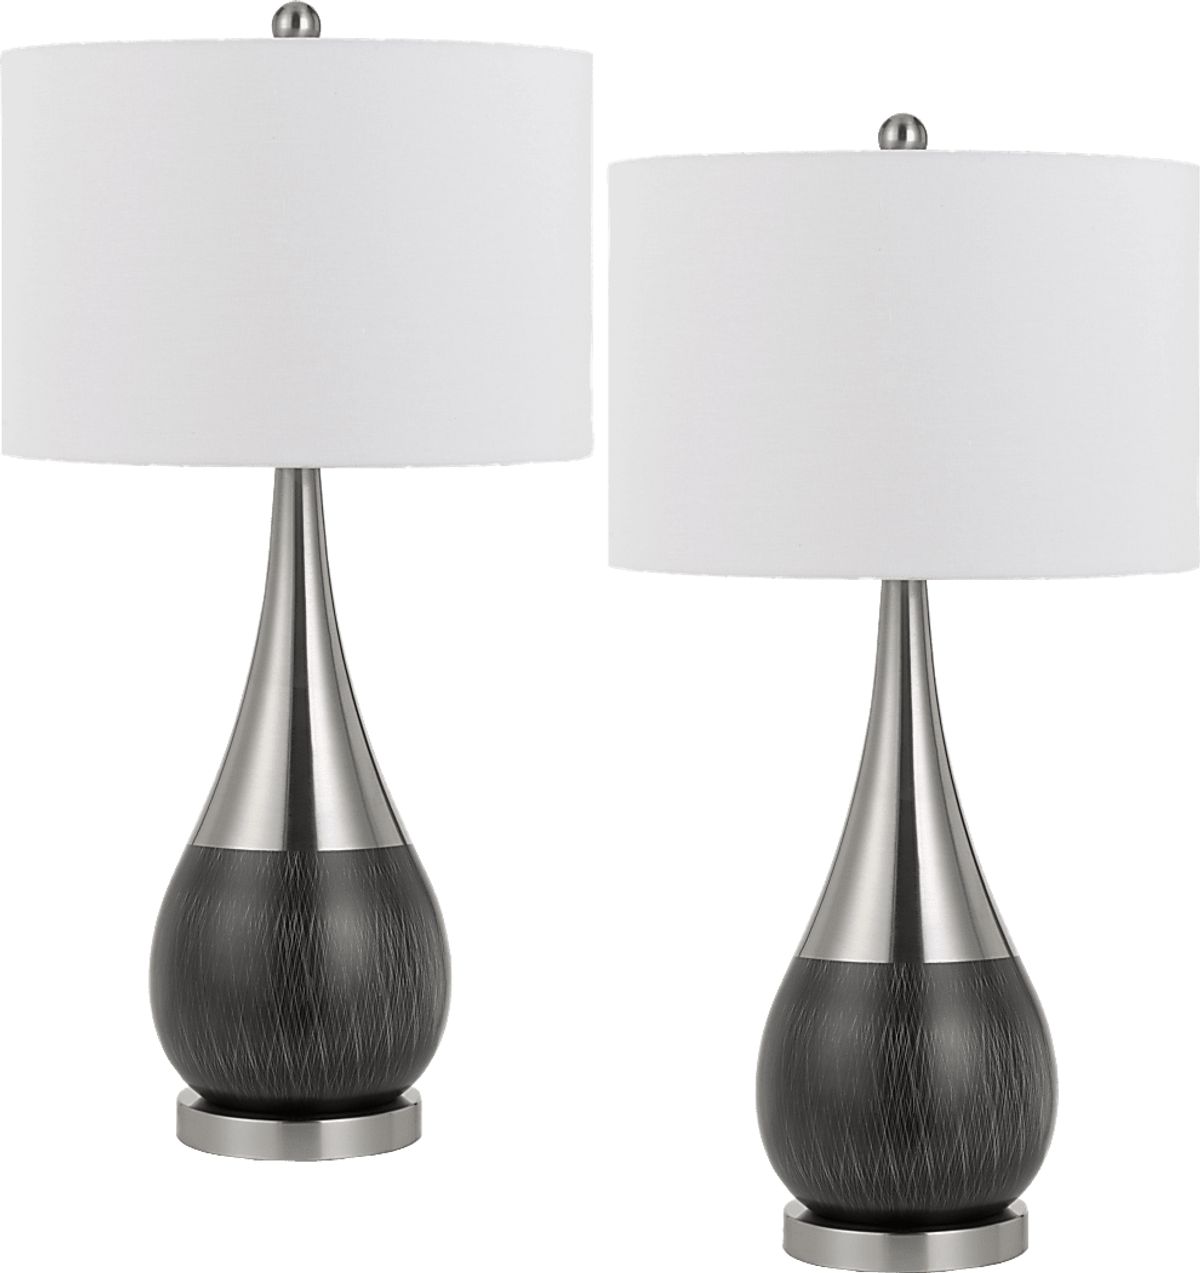 Sanborn Silver Gray Set Of 2 Table Lamp | Rooms to Go